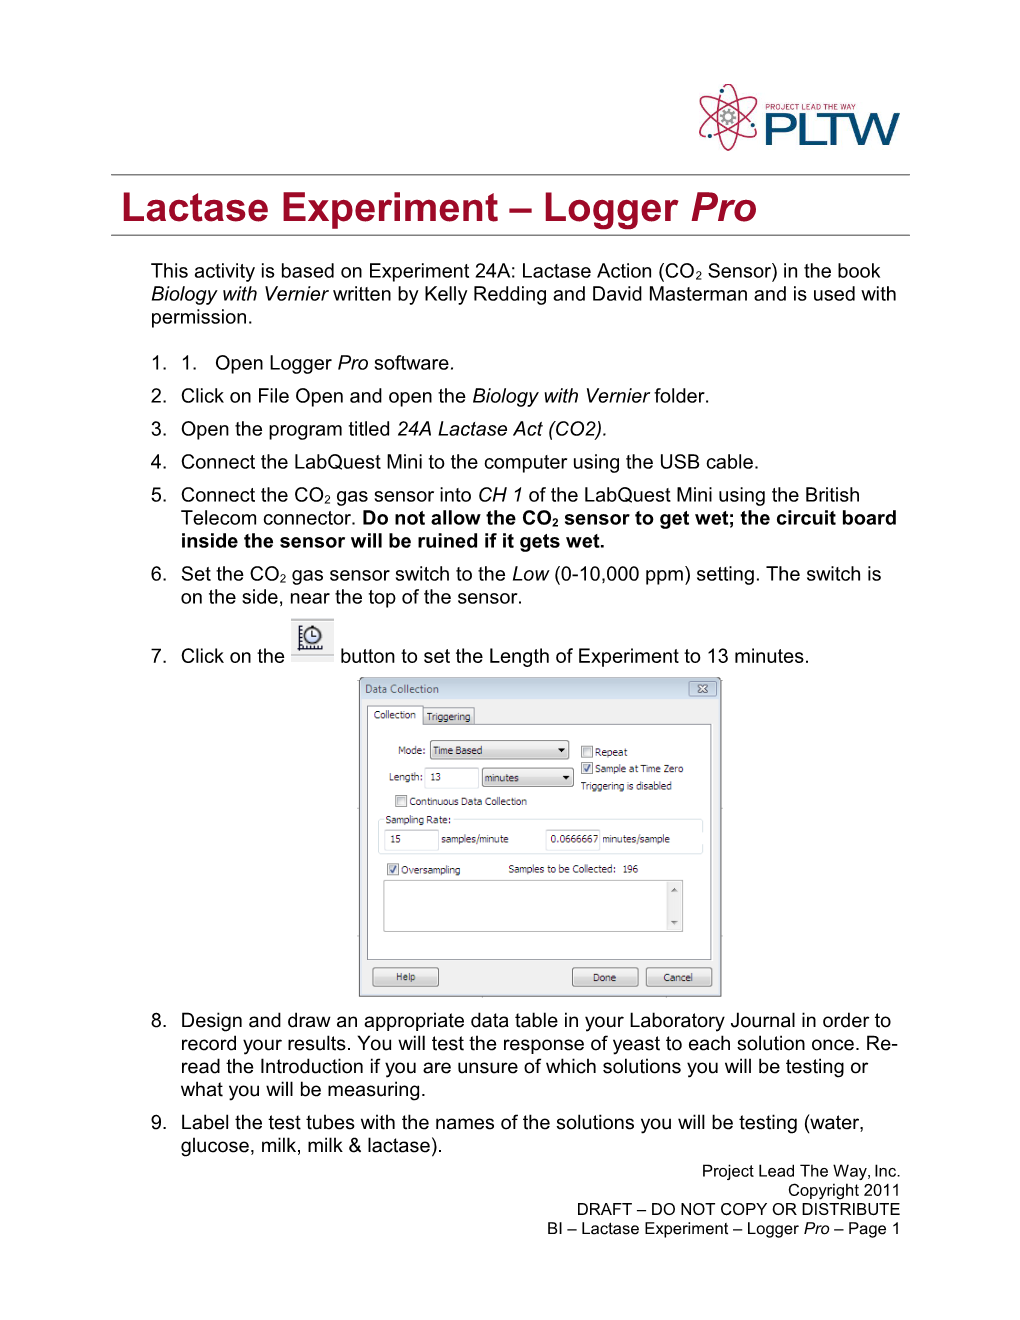 This Activity Is Based on Experiment 24A: Lactase Action (CO2 Sensor) in the Book Biology